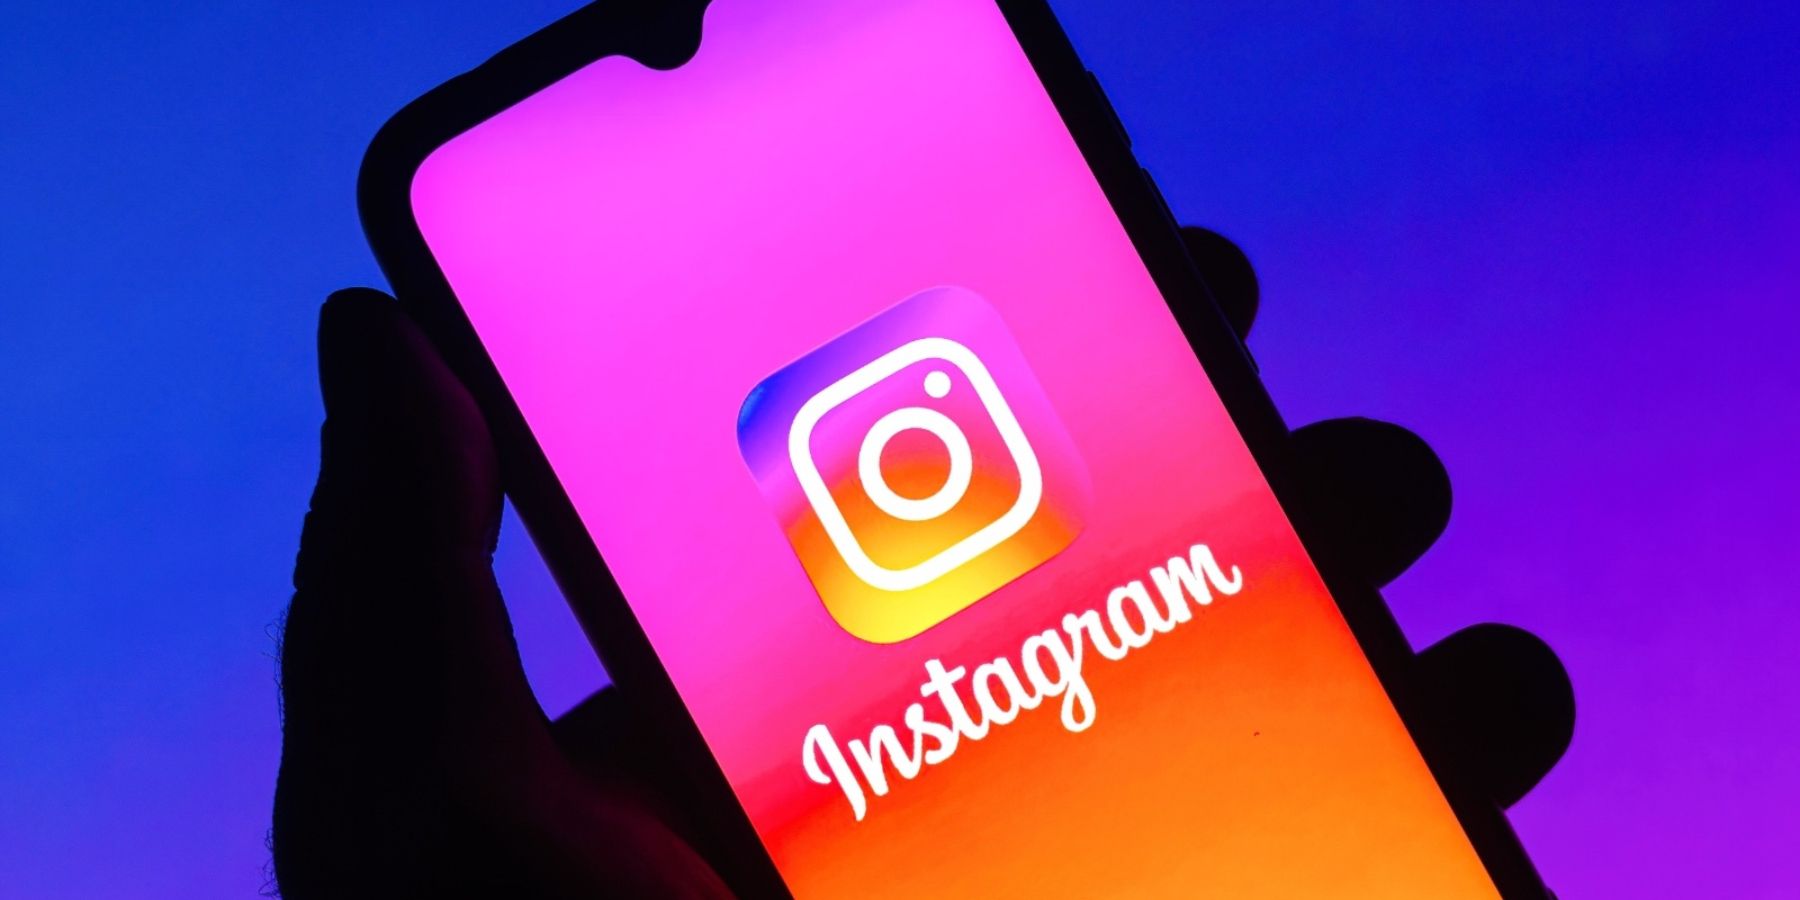 Russia Has Banned Instagram